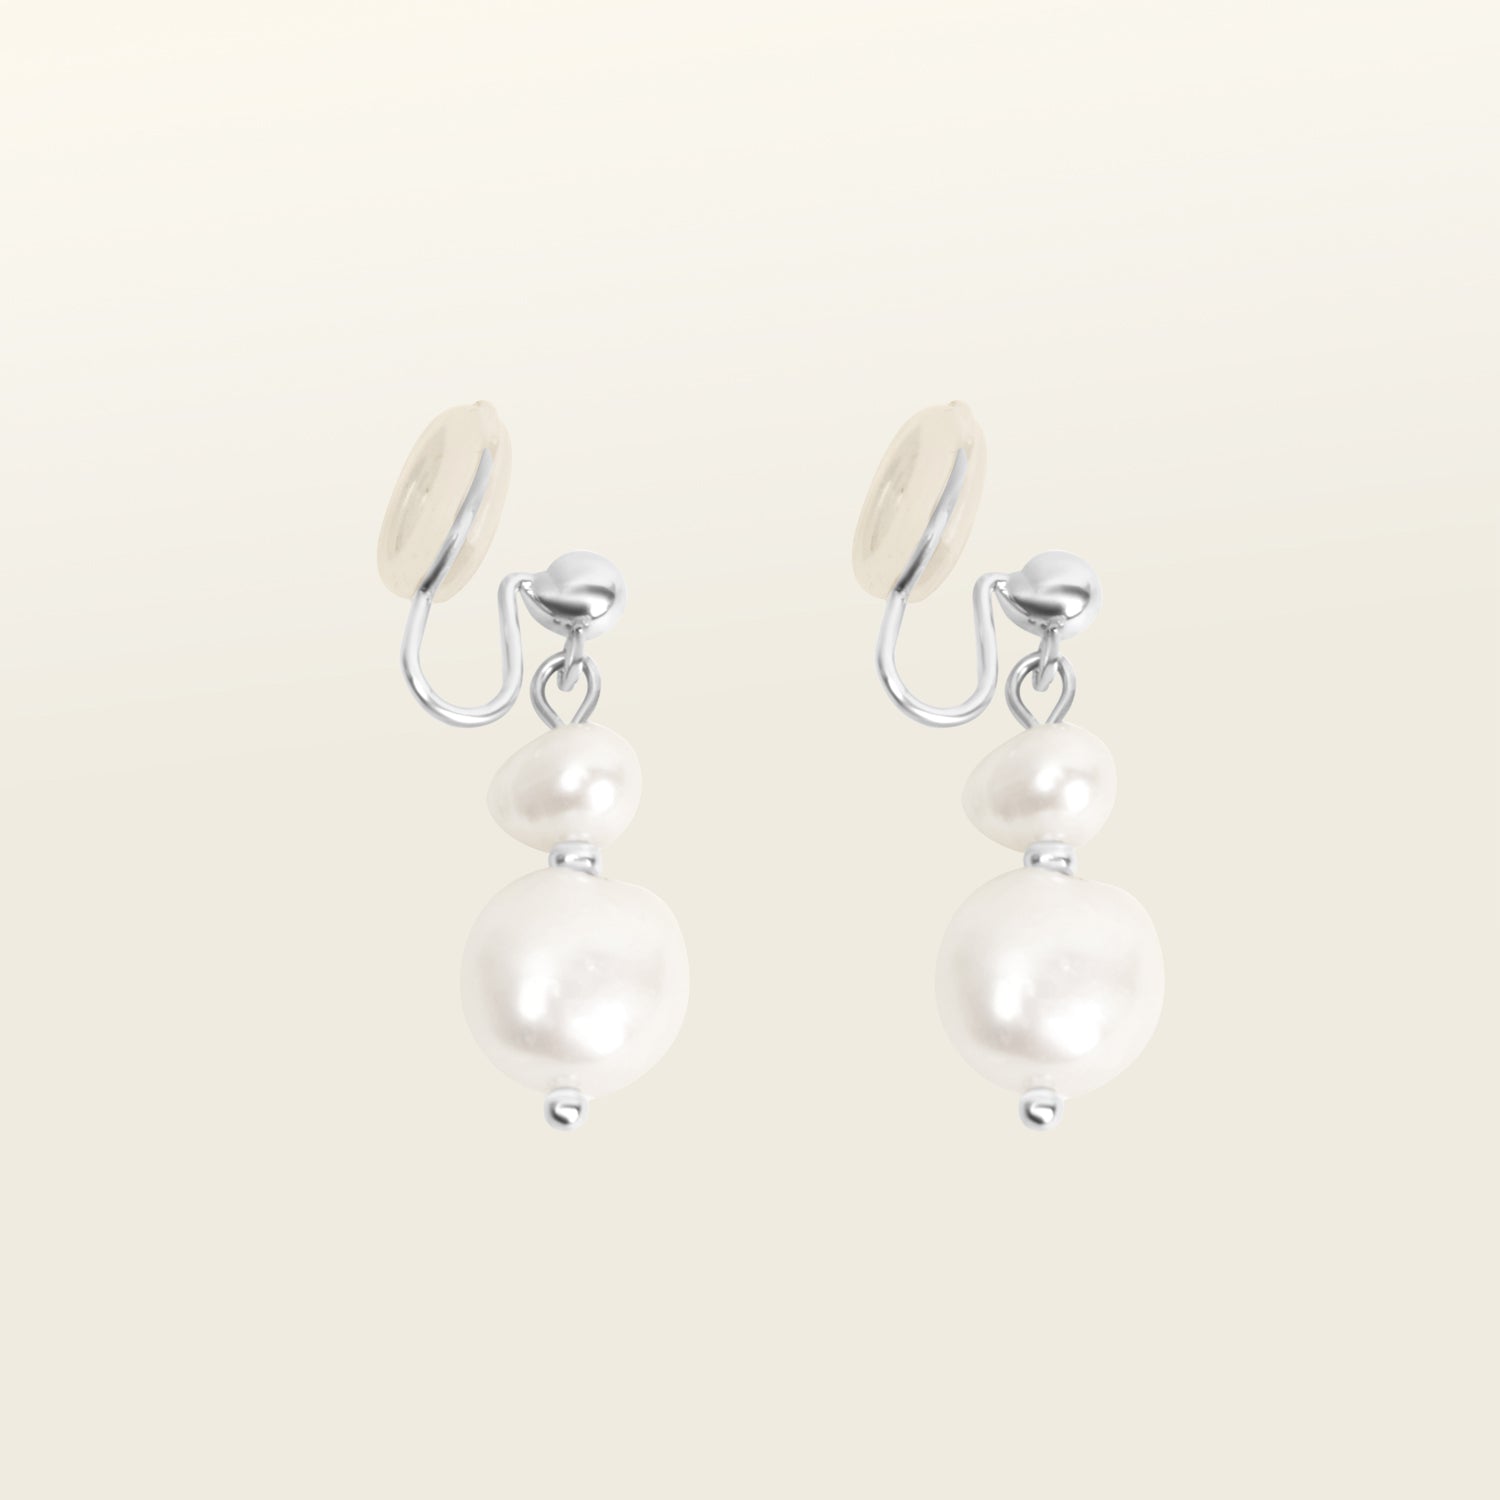 Image of the Silver Plated Brass Duo Pearl Clip-On Earrings features a mosquito coil clip-on design, making it ideal for all ear types including those with thick/large, sensitive, small/thin, and stretched/healing ears. These earrings comfortably allow for up to 24 hours of wear and have a medium secure hold with adjustable padding. The freshwater pearls used in these earrings may vary slightly in size and colour.